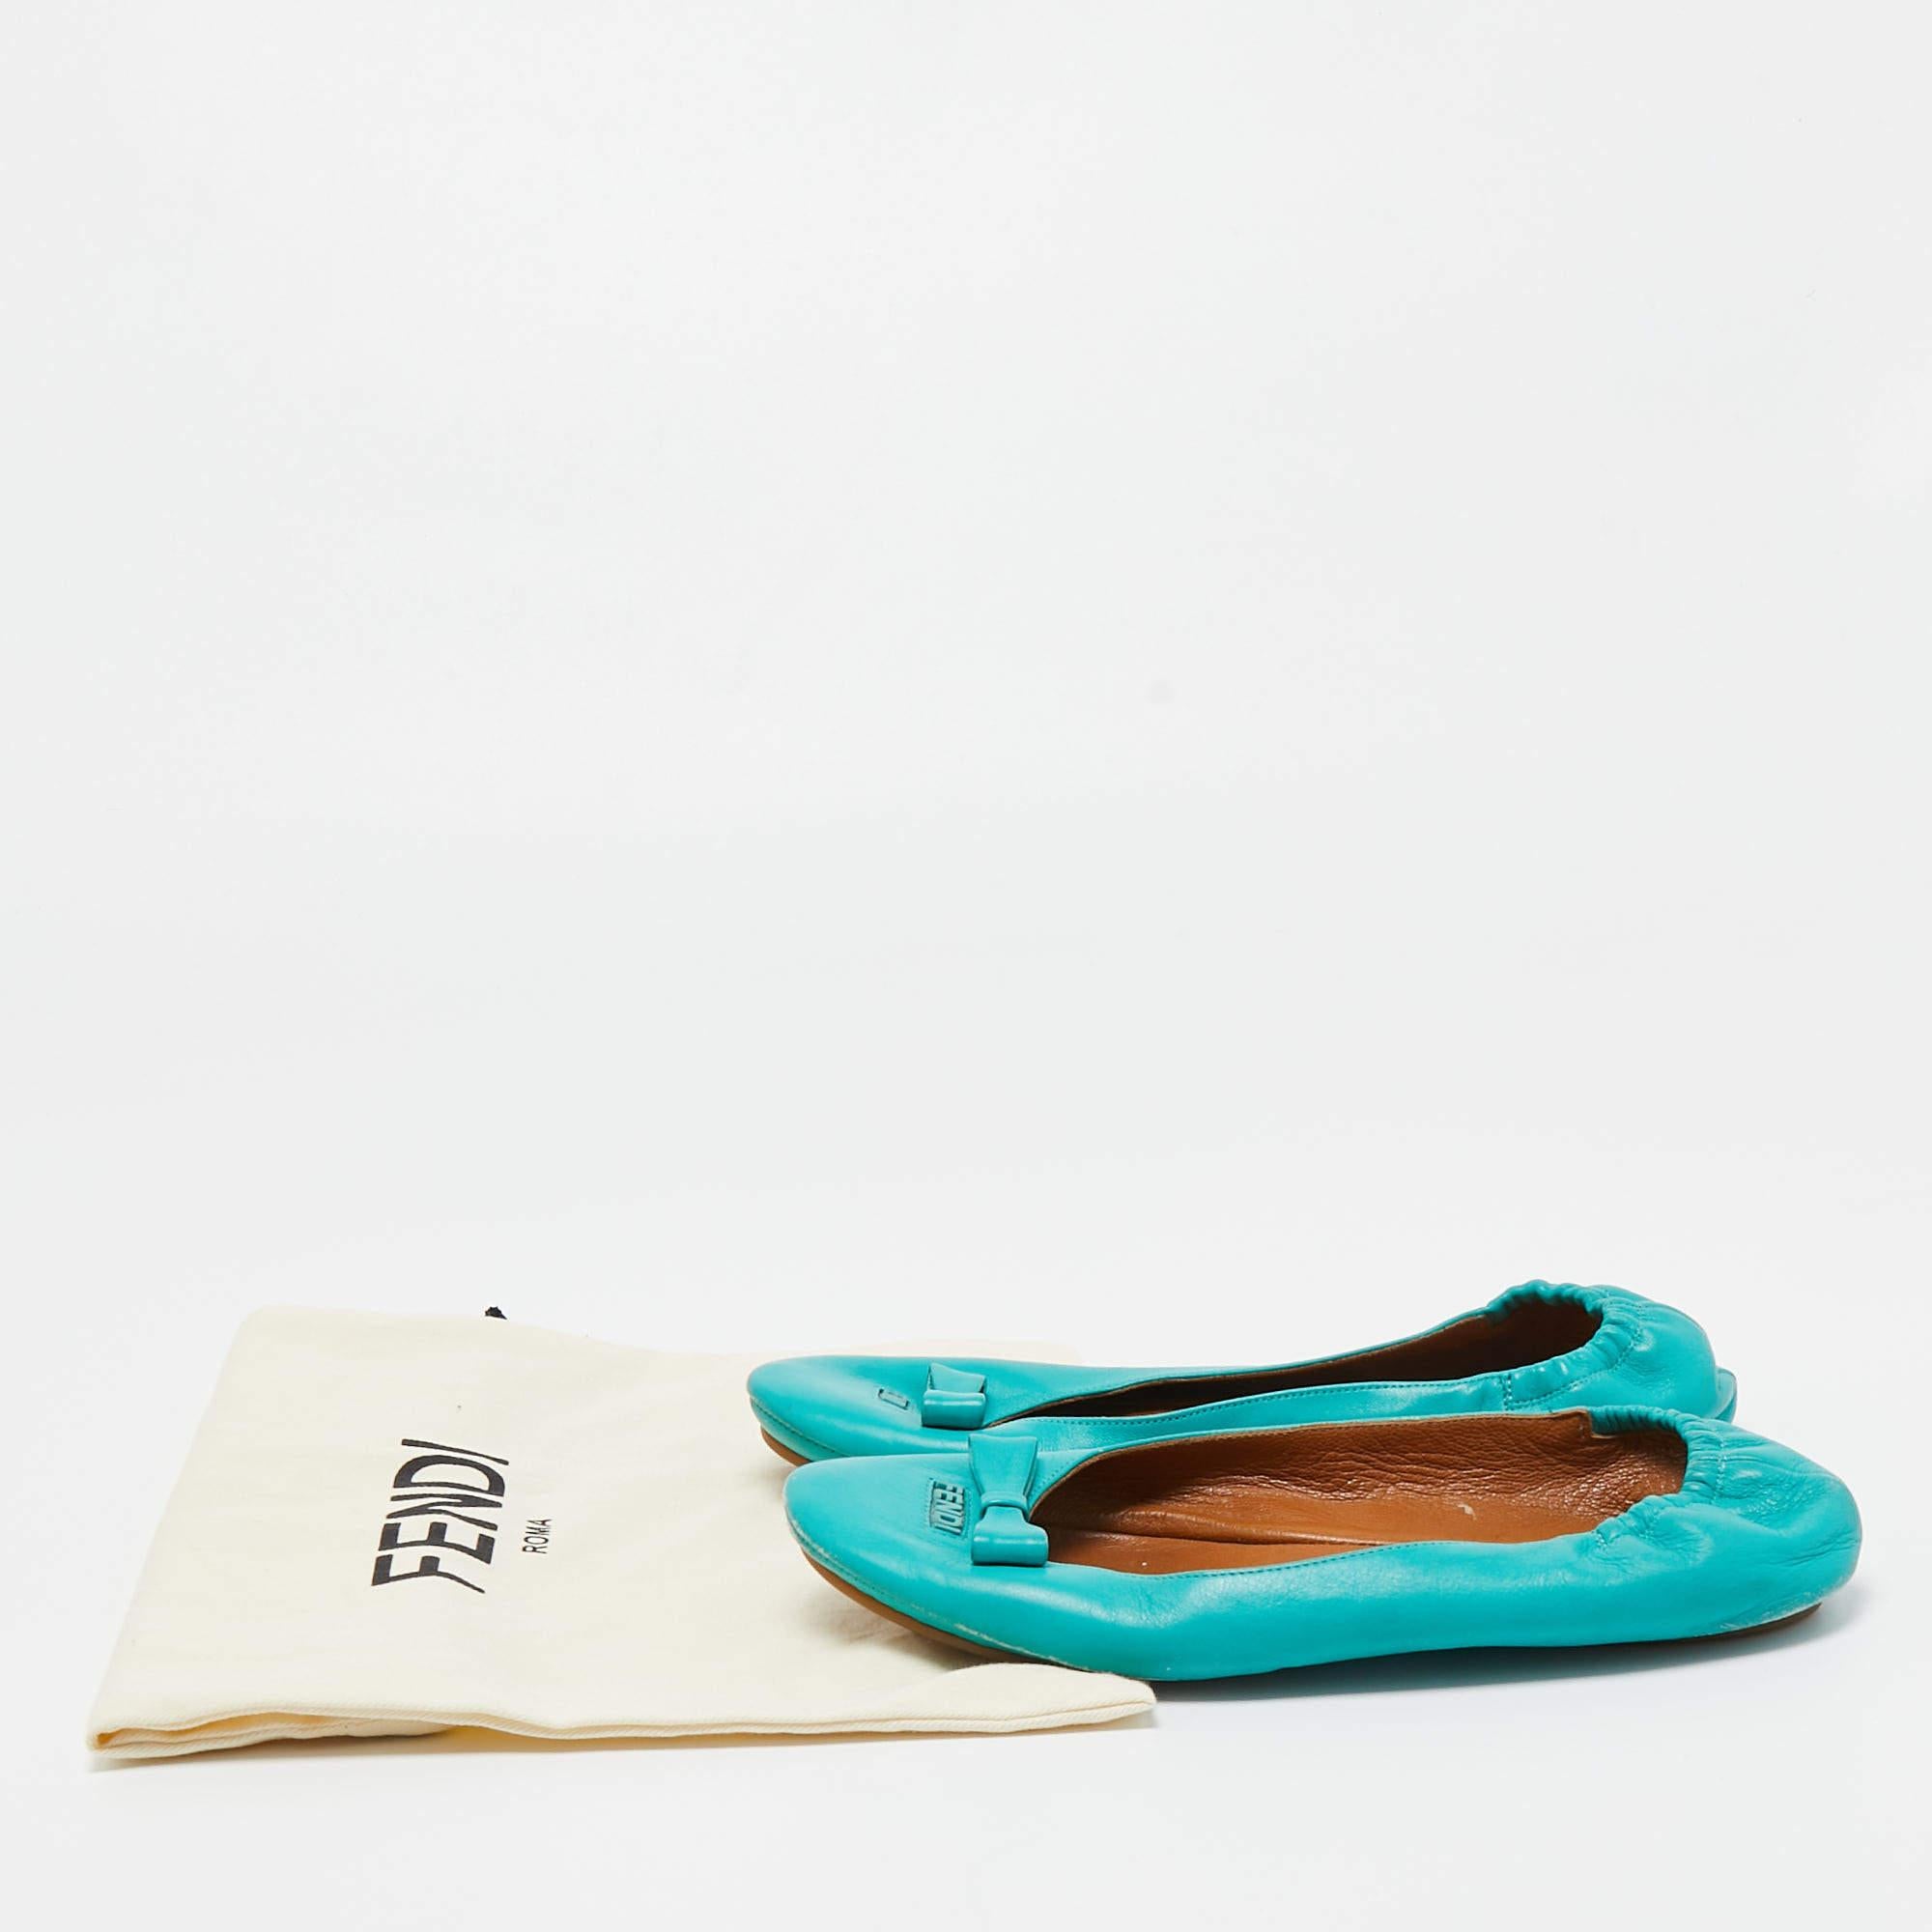 Fendi Turquoise Leather Bow Scrunch Ballet Flats Size 39 5